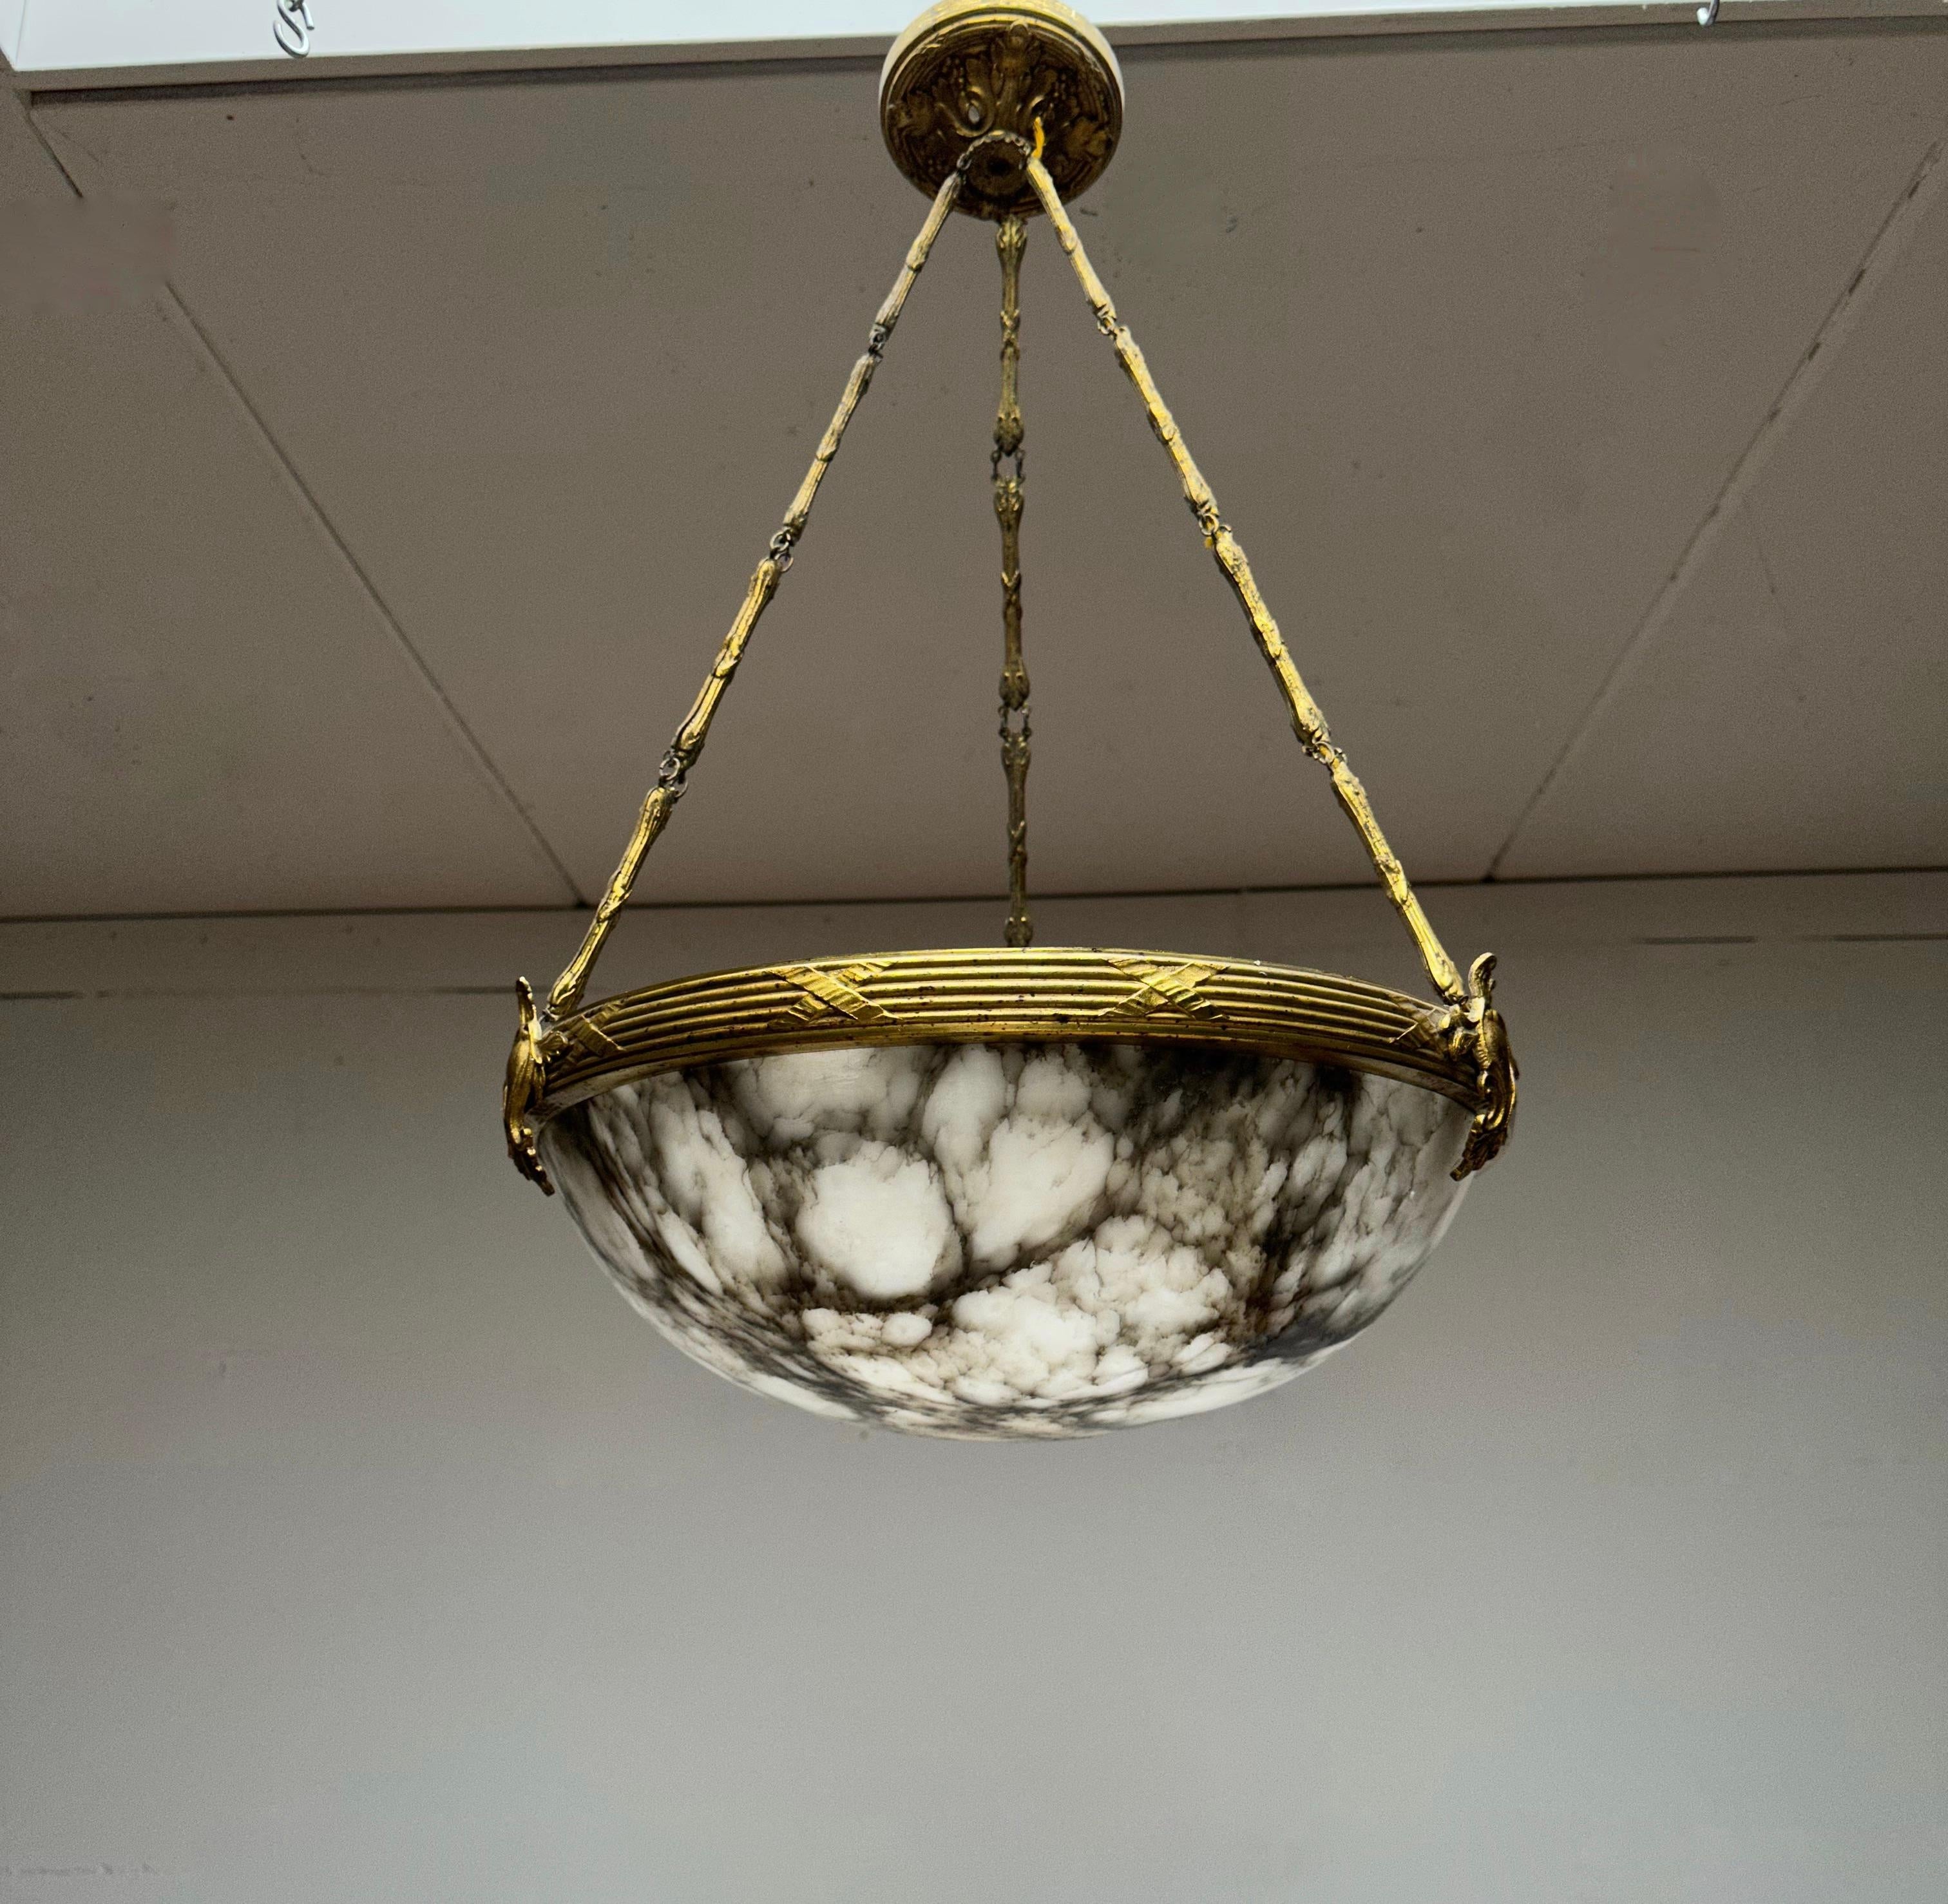 Antique and practical size, Classical French, 3-light chandelier in superb condition.

With early 20th century lighting as one of our specialities, we were again thrilled to find an unique alabaster pendant with a striking alabaster stone shade.